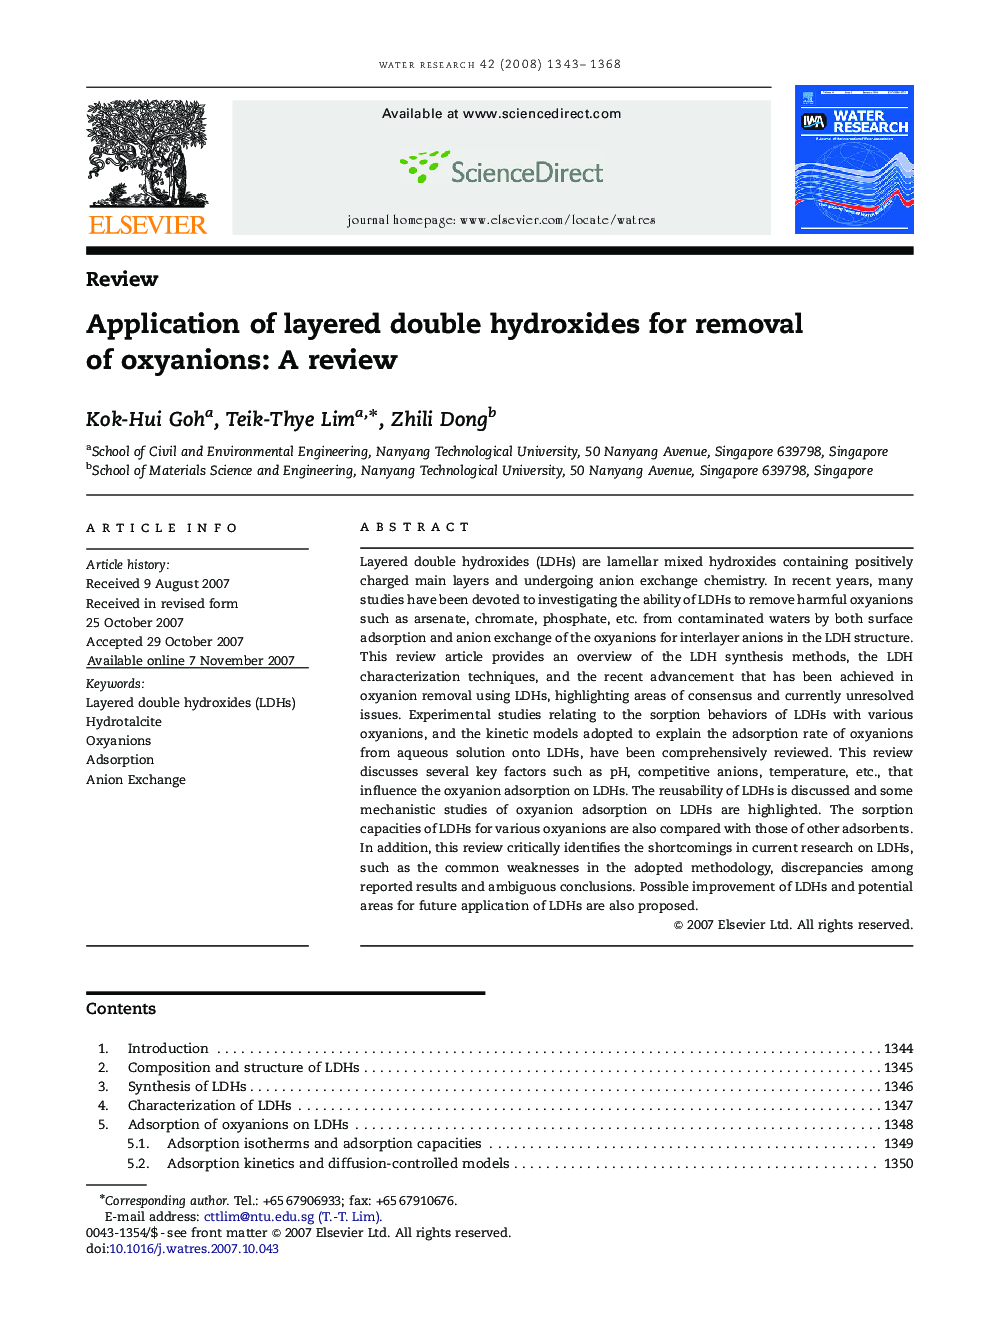 Application of layered double hydroxides for removal of oxyanions: A review